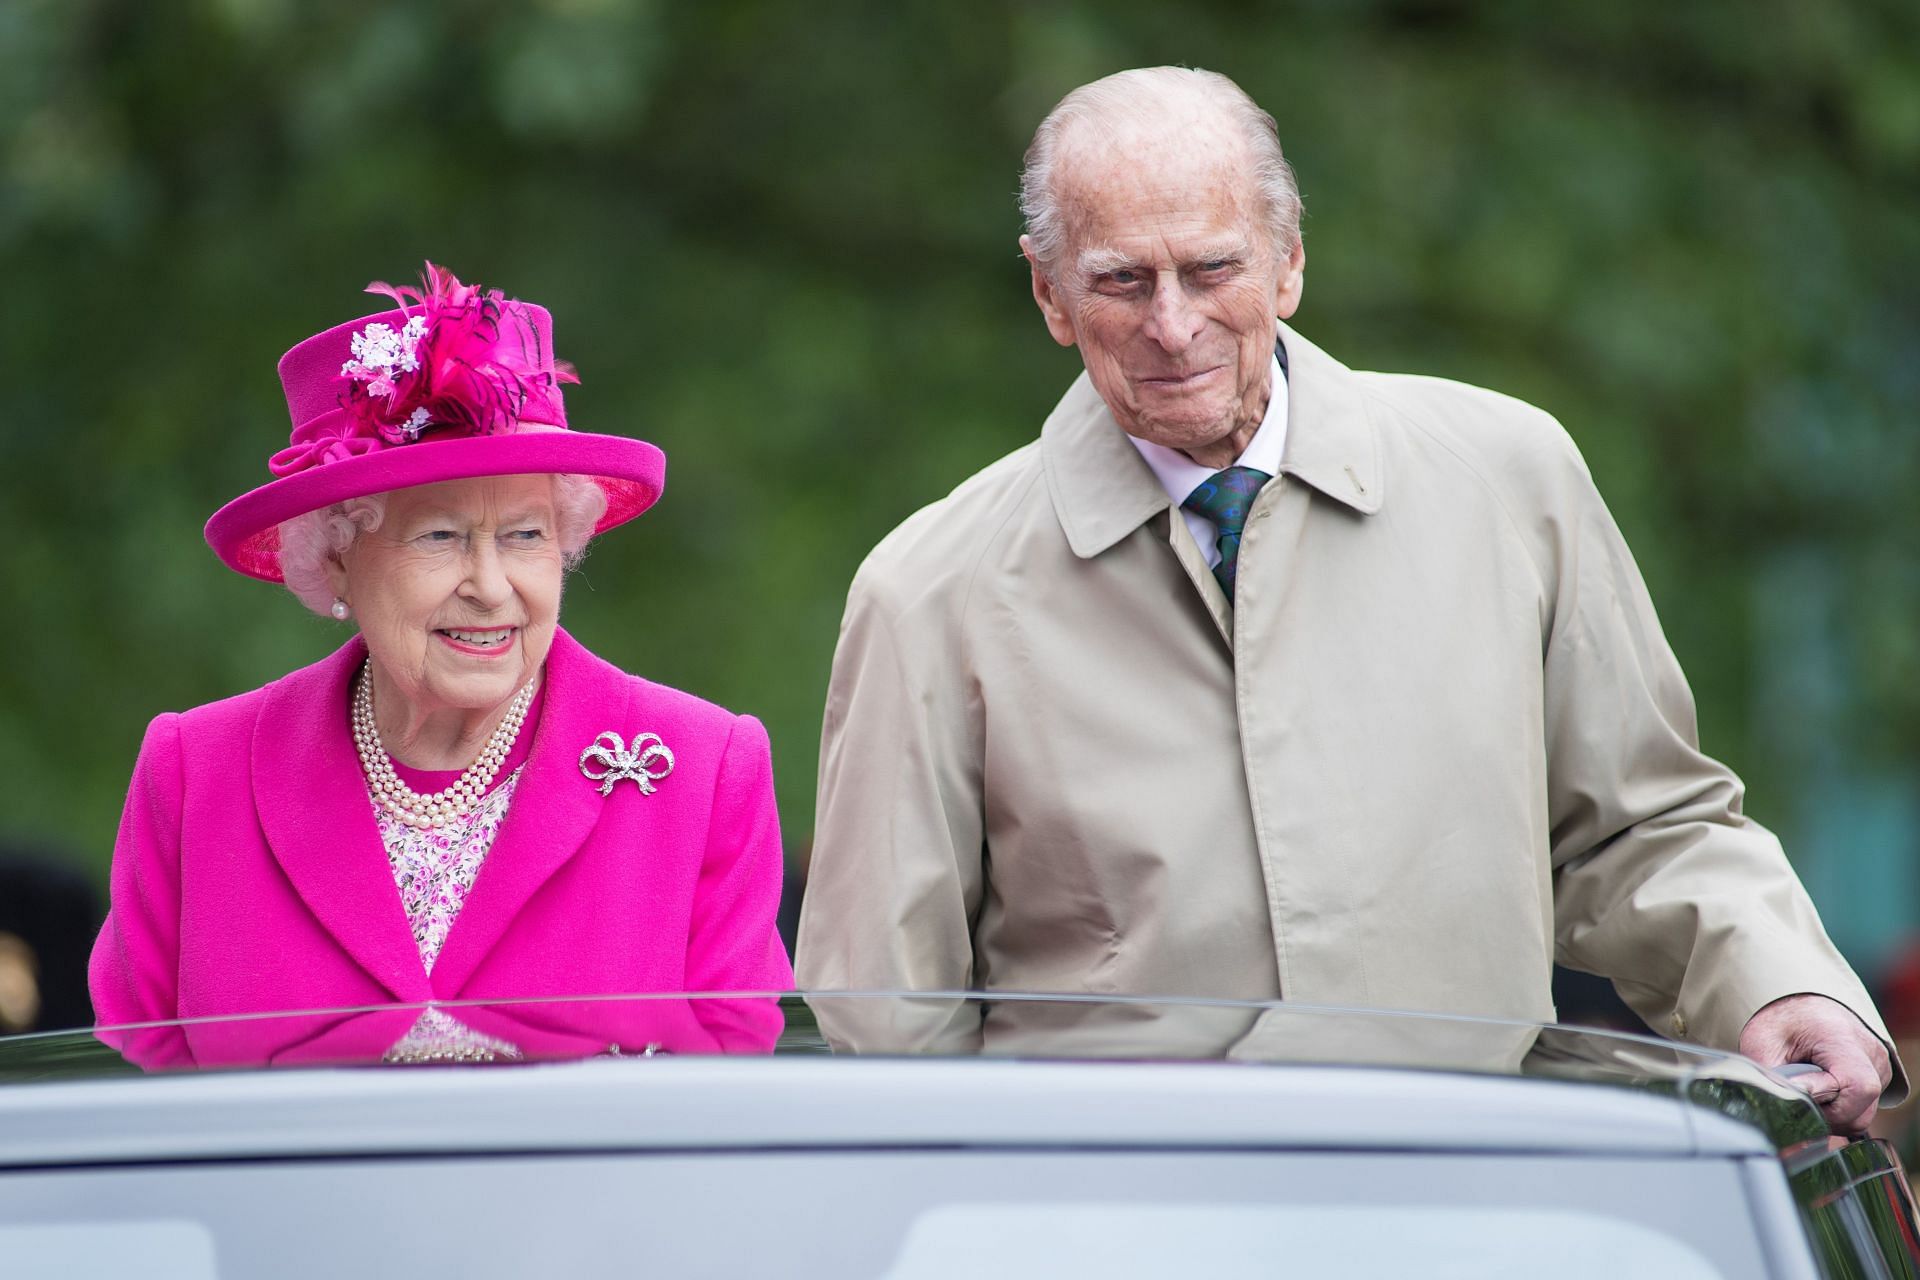 Queen Elizabeth II and Prince Philip, Duke of Edinburgh in 2016 (Photo by Jeff Spicer/Getty Images)